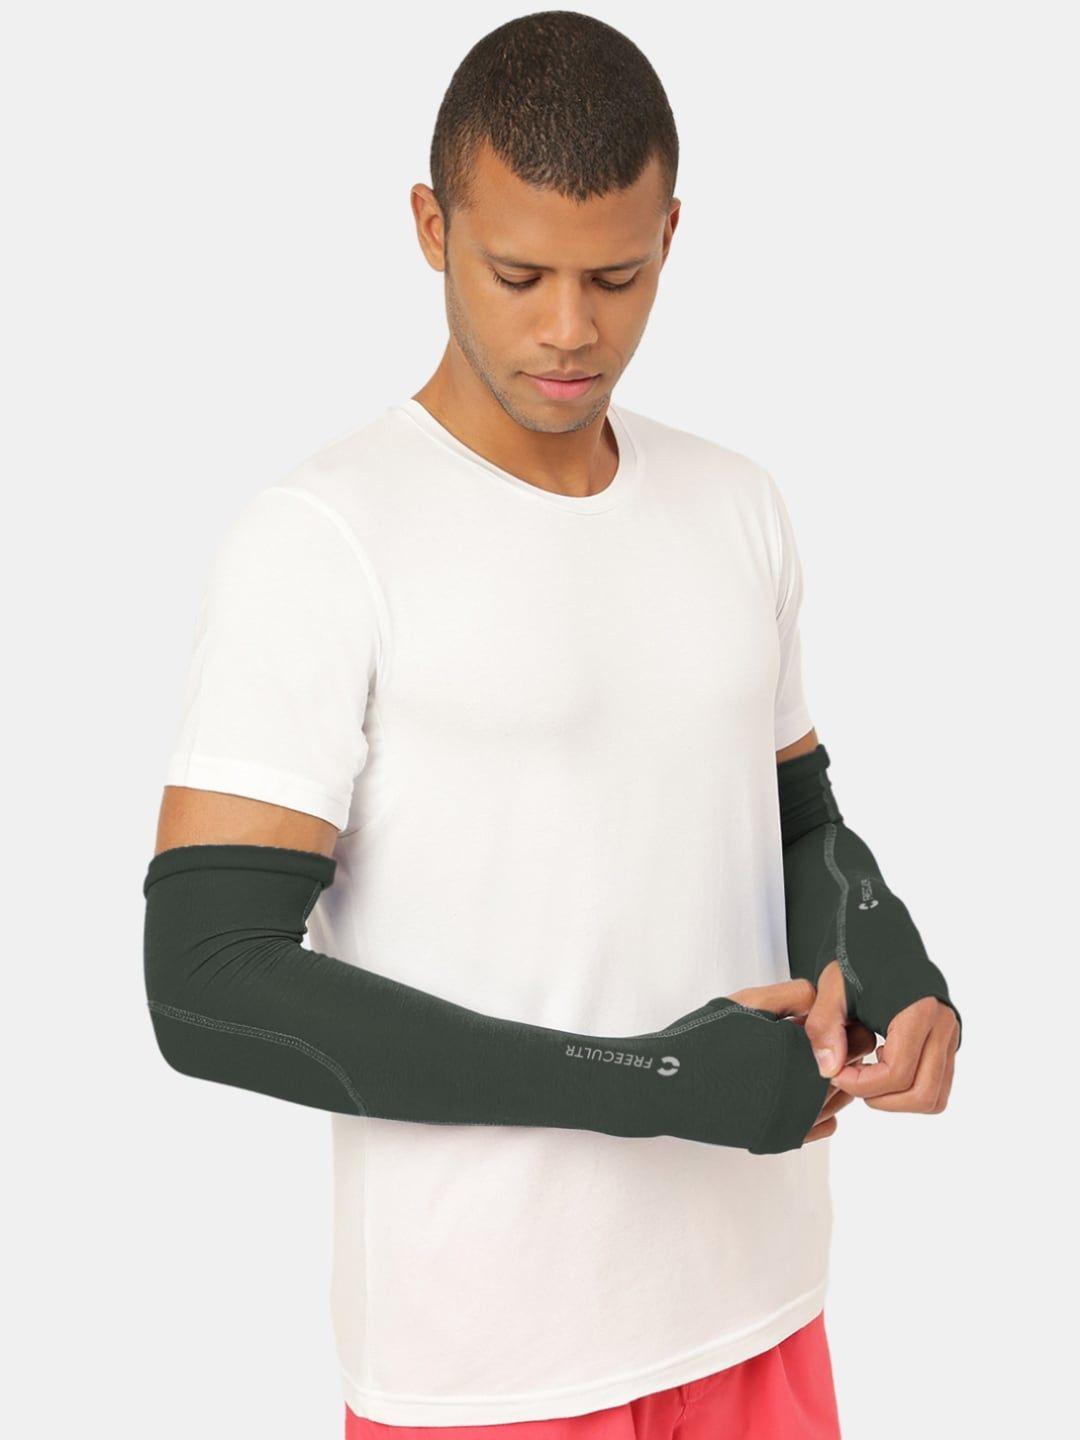 freecultr-bamboo-antibacterial-arm-sleeves-with-built-glove